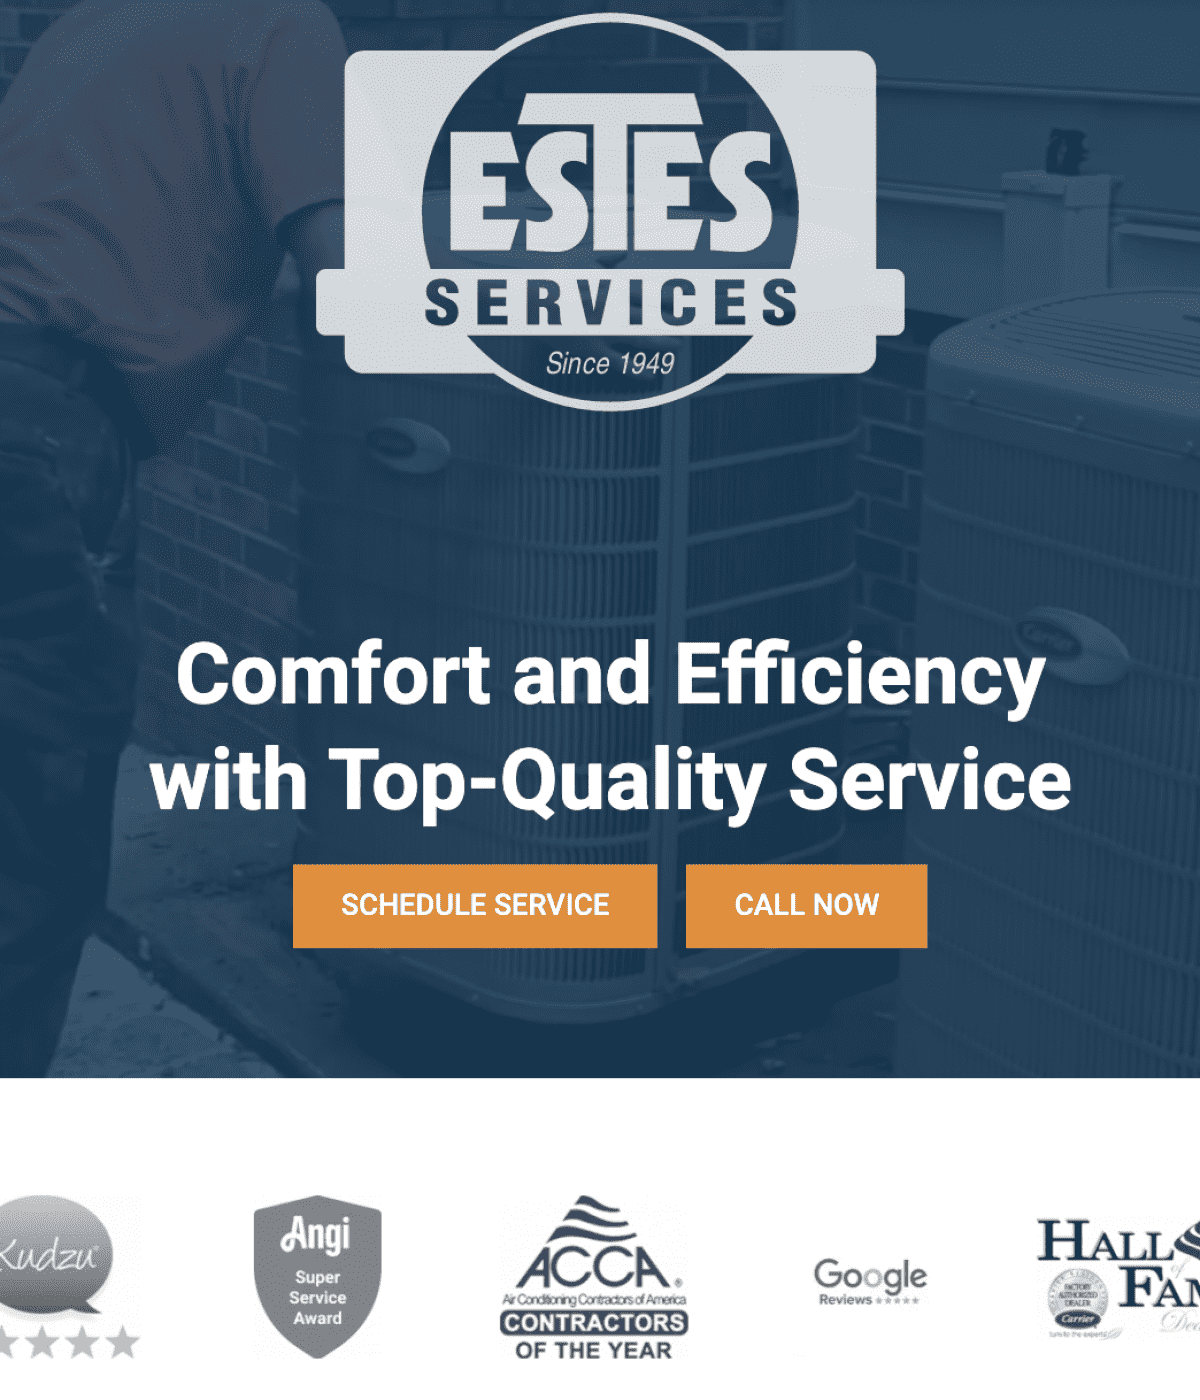 Image of website for Estes Services